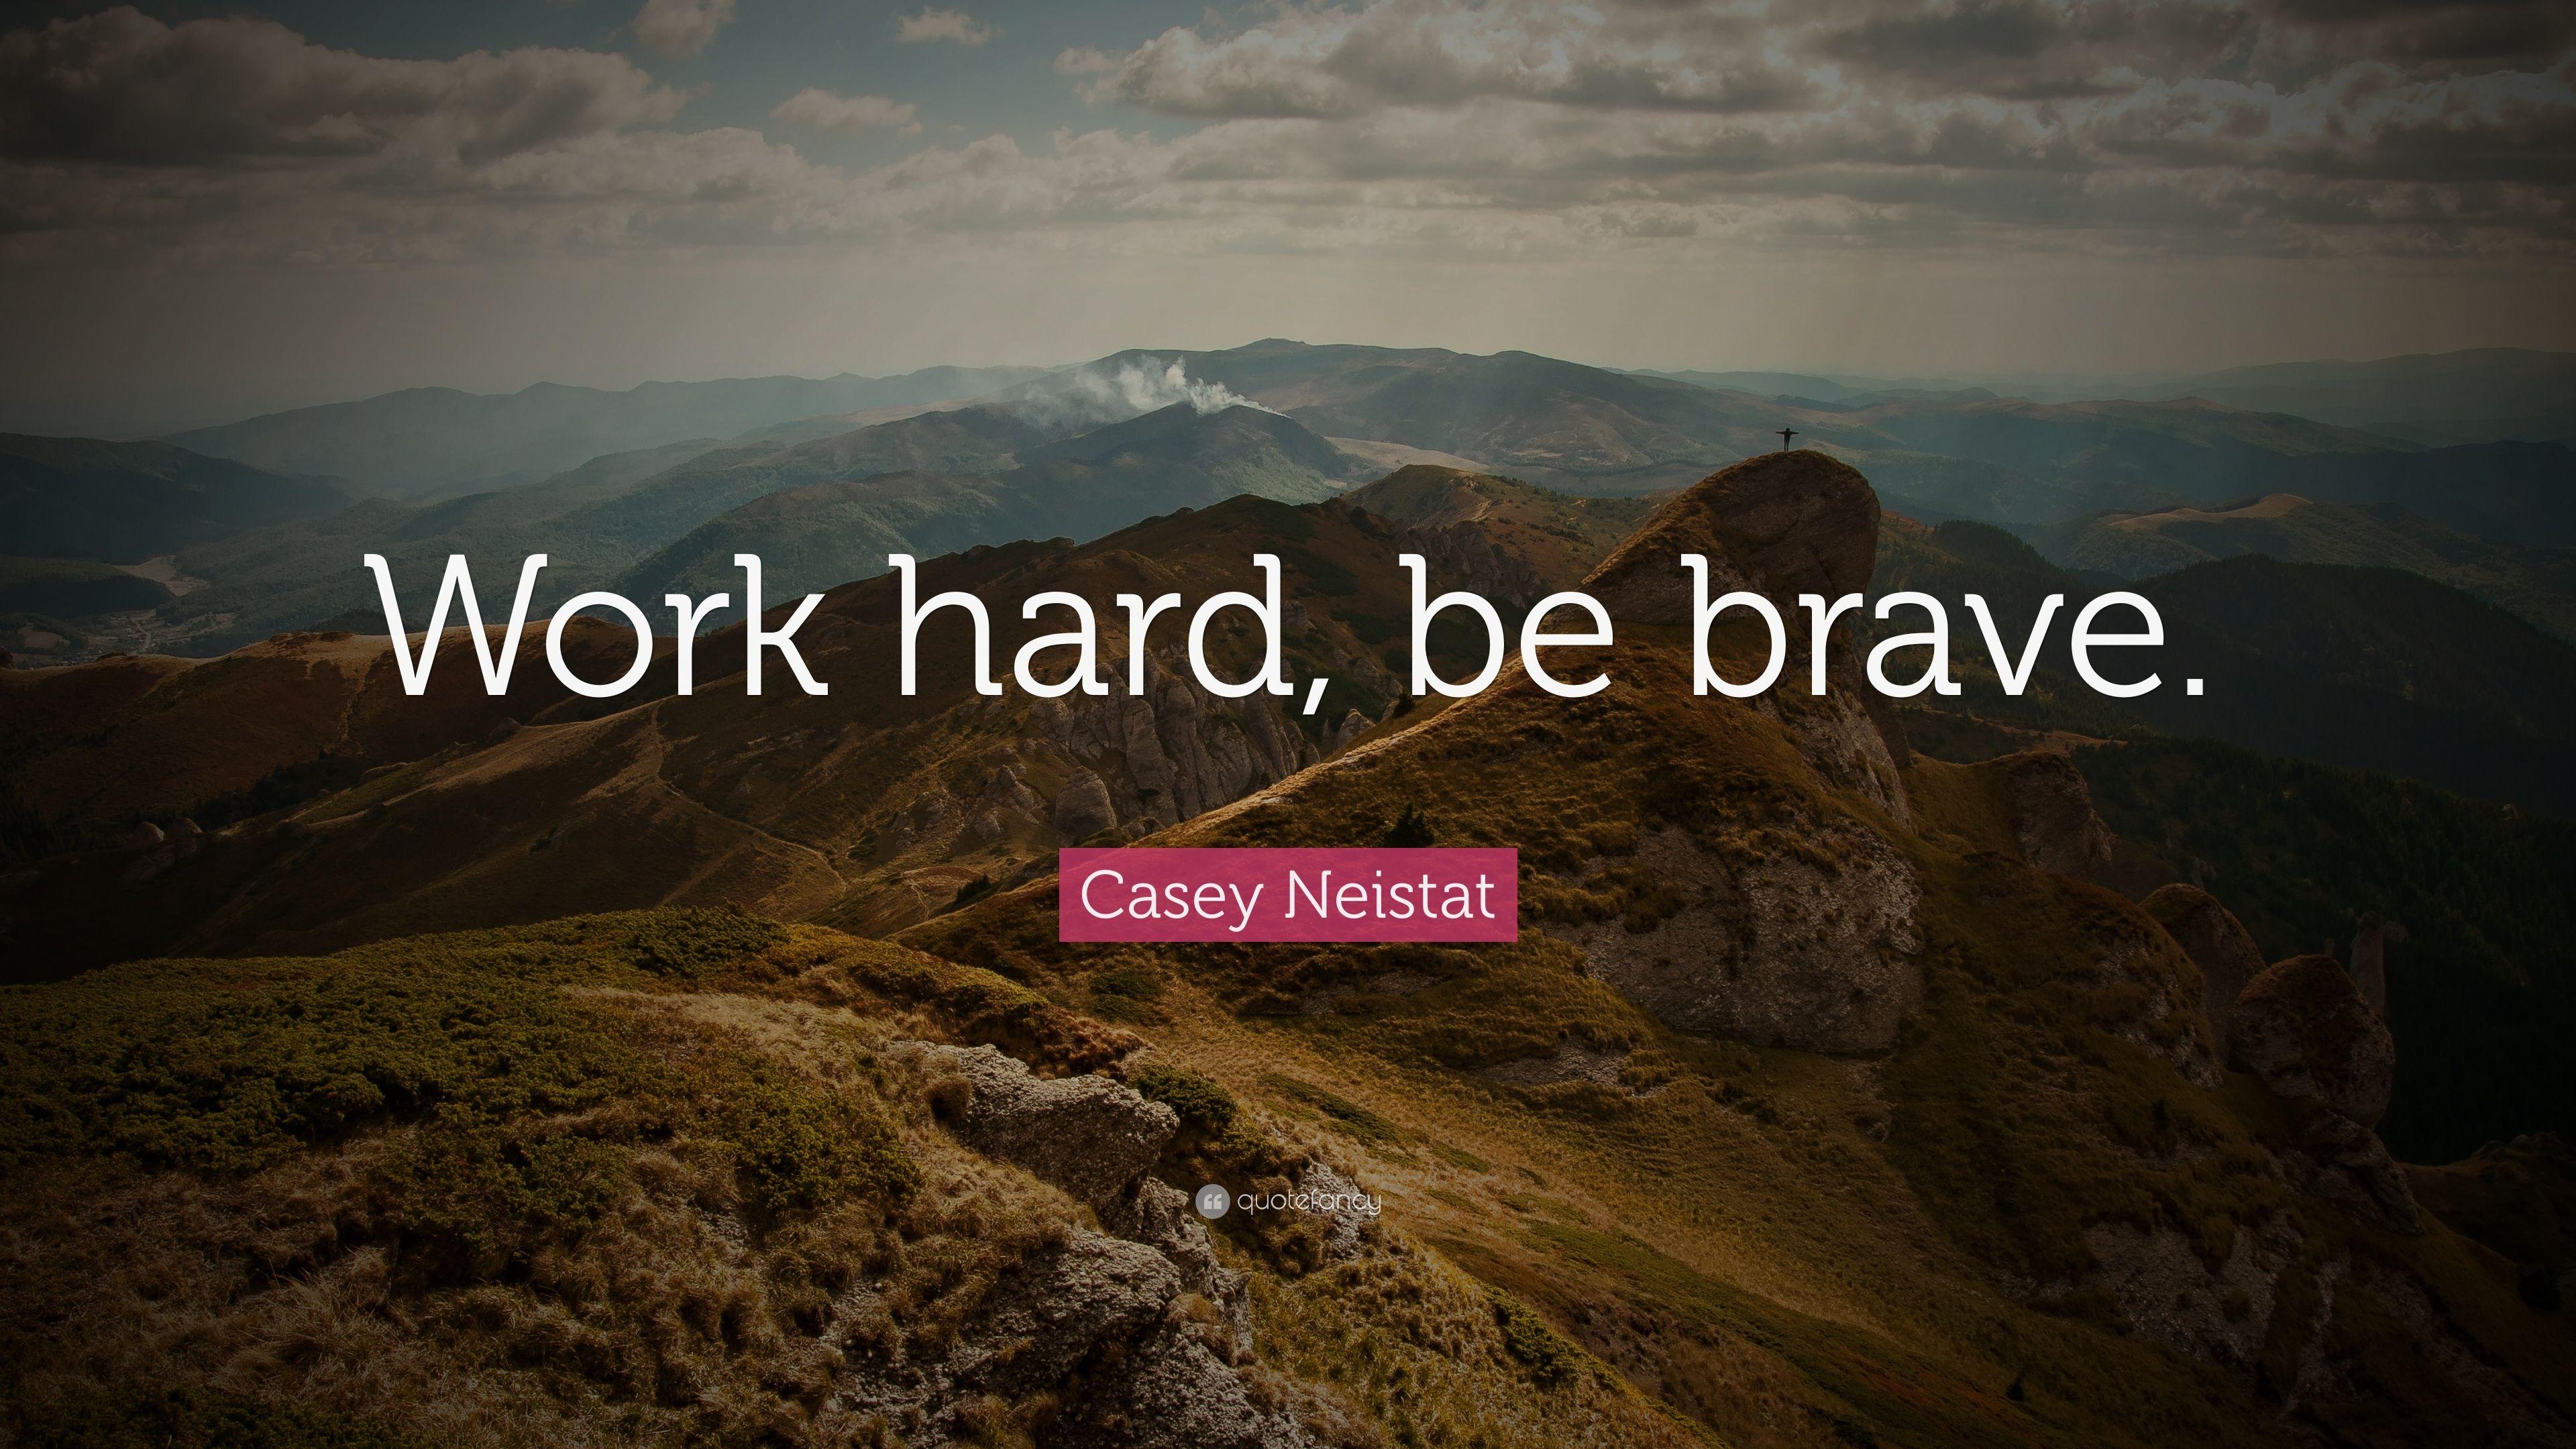 quotefancy» 1080P, 2k, 4k Full HD Wallpapers, Backgrounds Free Download |  Wallpaper Crafter